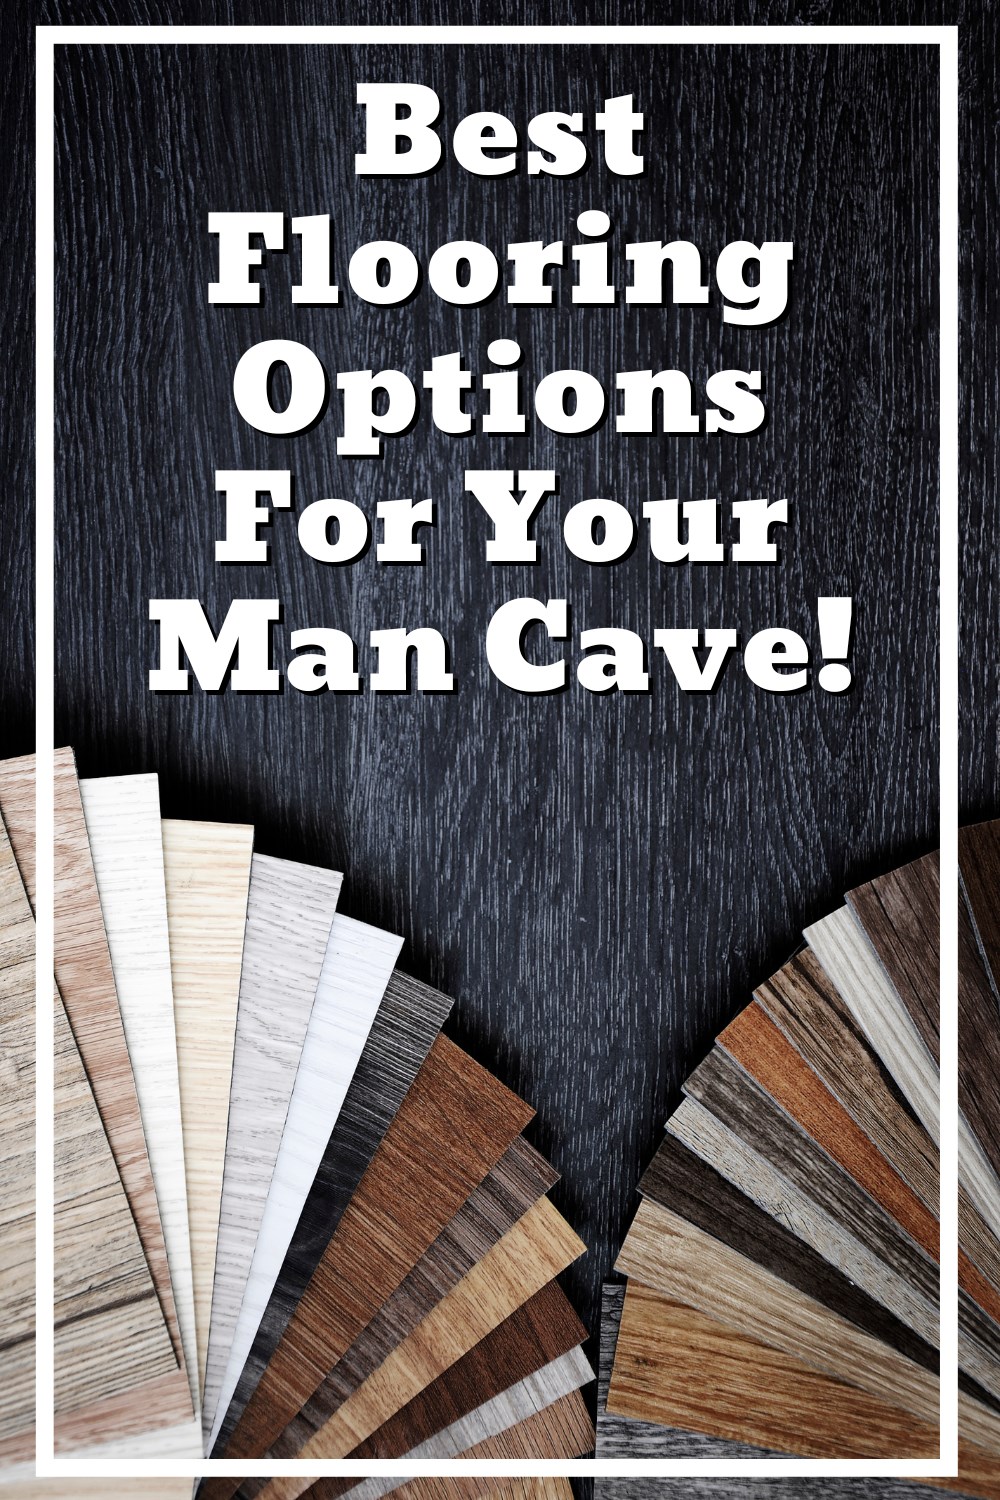 6 Flooring options for a man cave